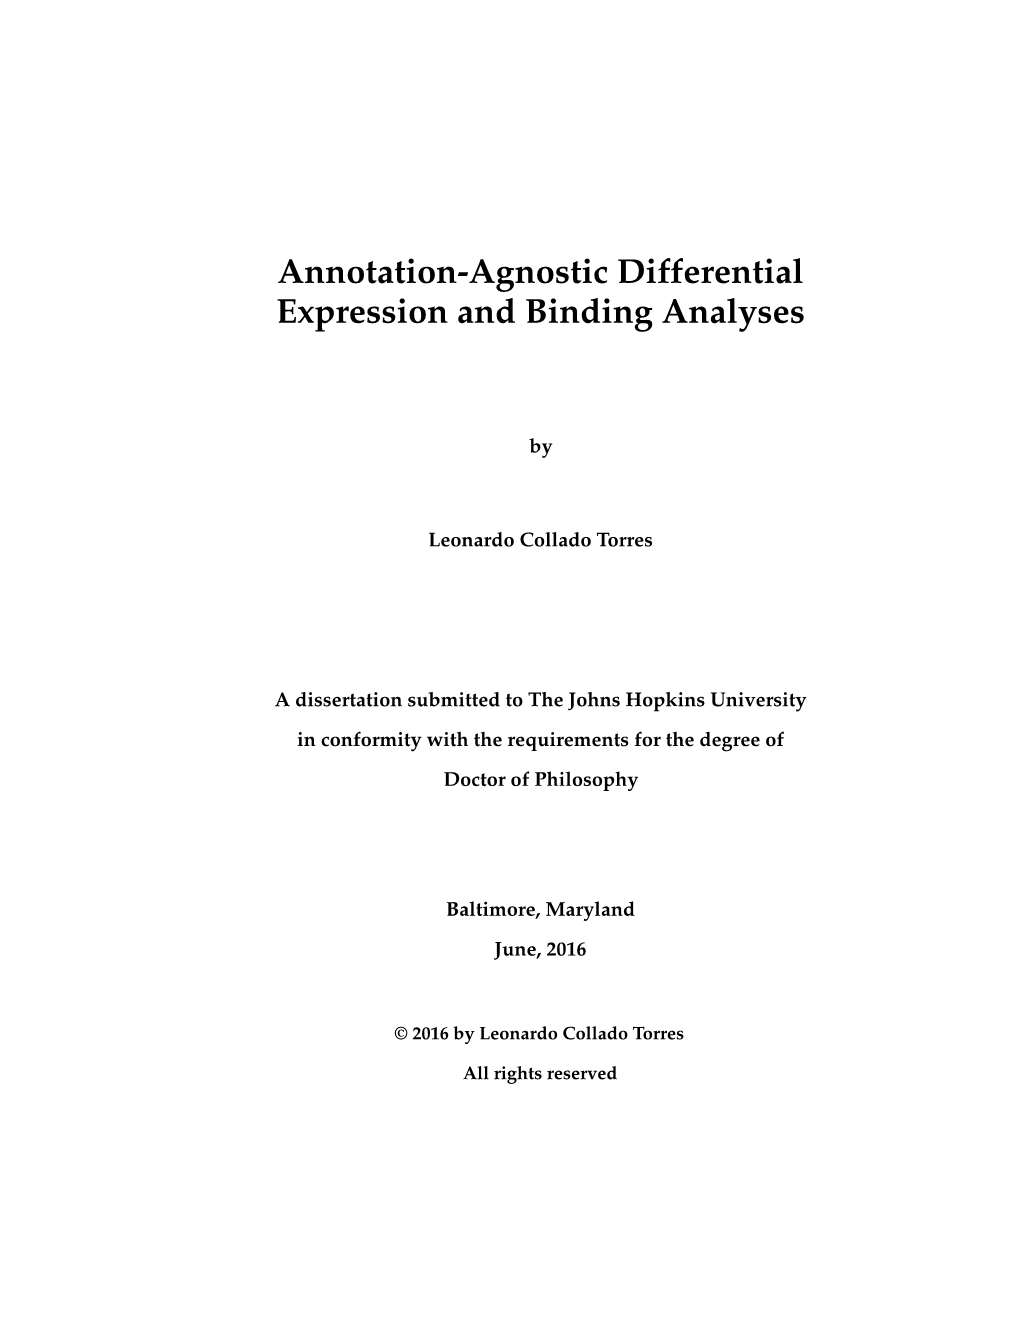 Annotation-Agnostic Differential Expression and Binding Analyses